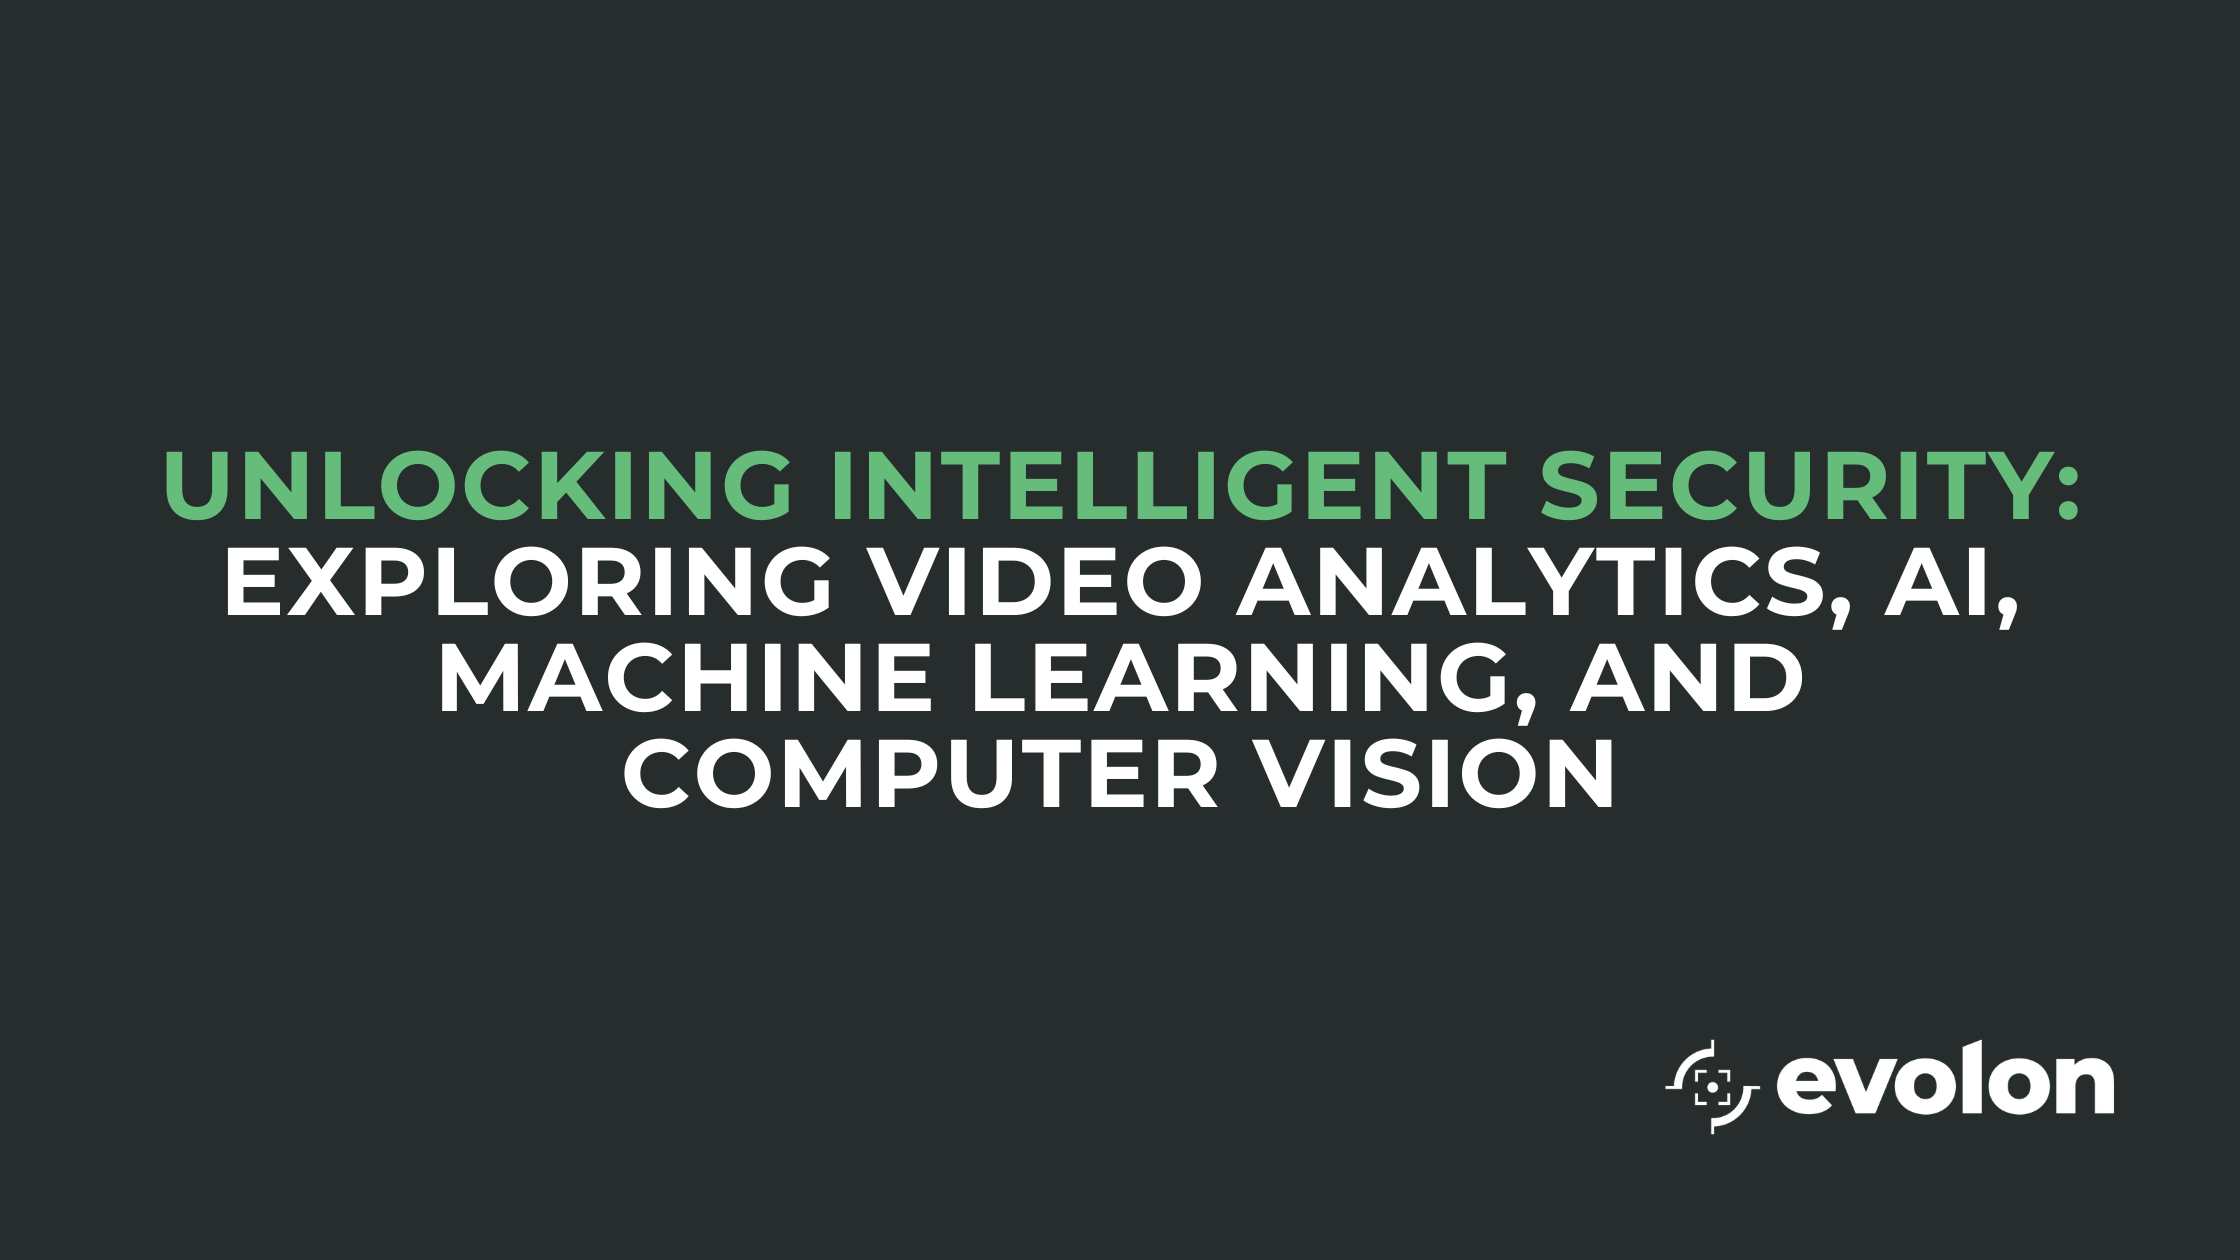 Unlocking Intelligent Security: Exploring Video Analytics, AI, Machine Learning, and Computer Vision.